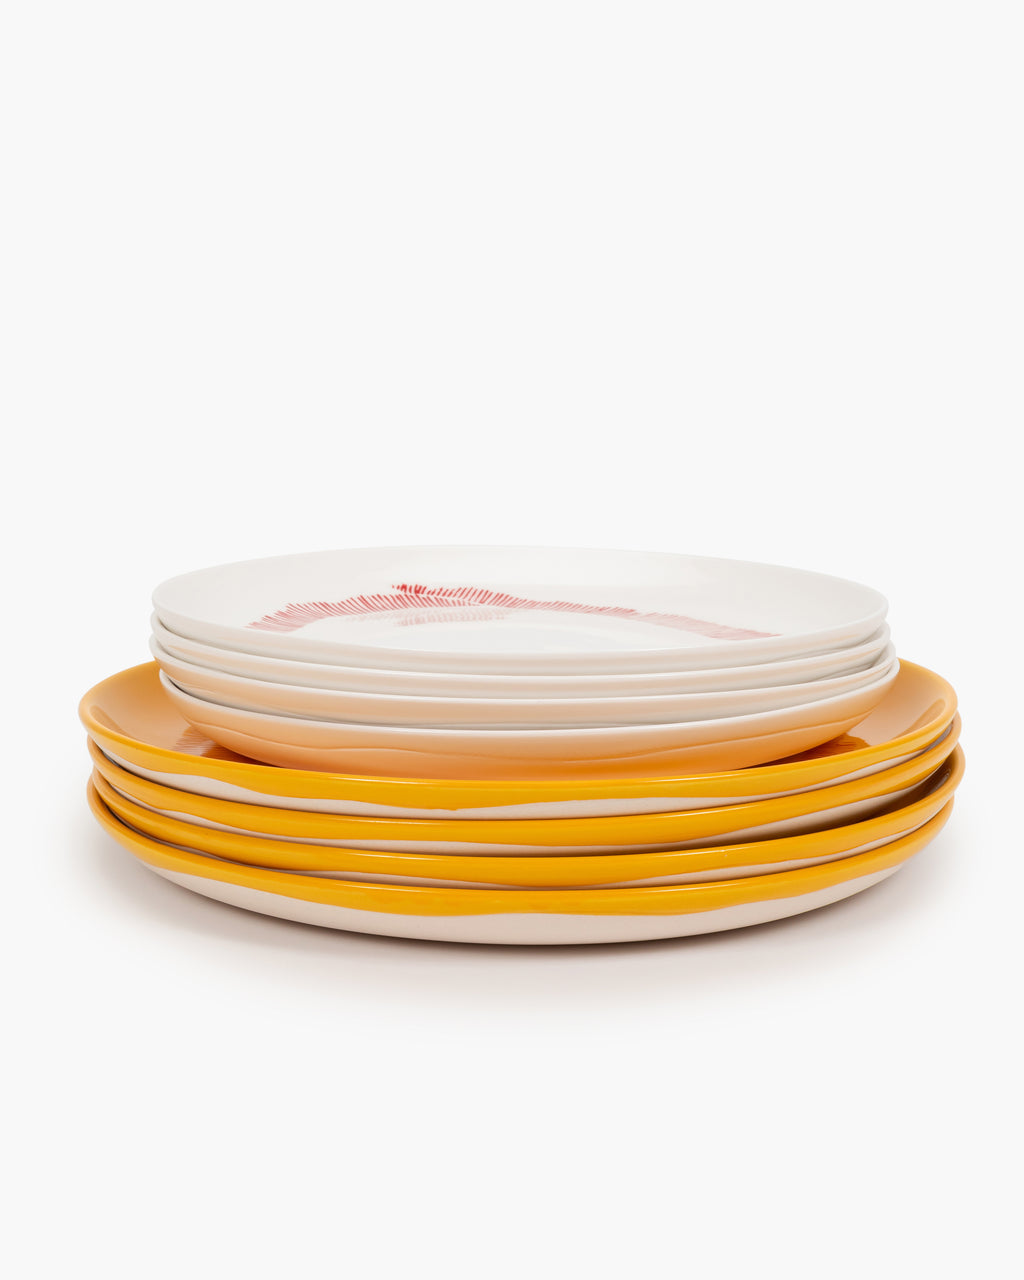 Dinner Set 12 pieces - Feast tableware by Ottolenghi - White